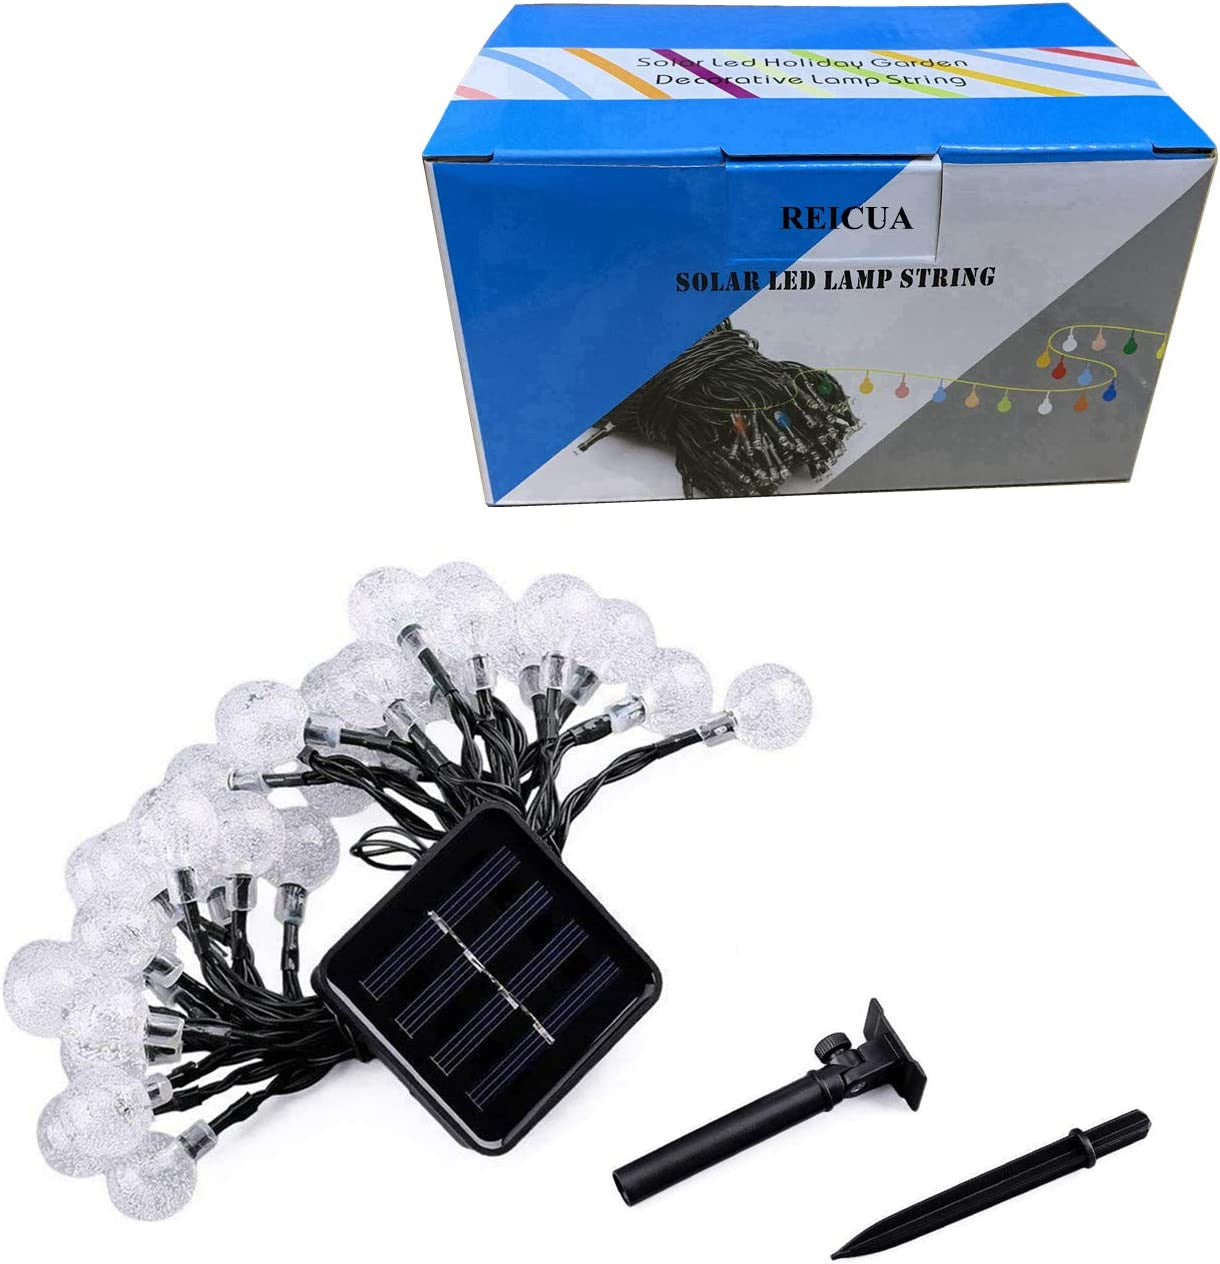  Solar Garden Lights, Outdoor String Lights with Balls, Waterproof 6m 30 LED 8 Twinkling Modes